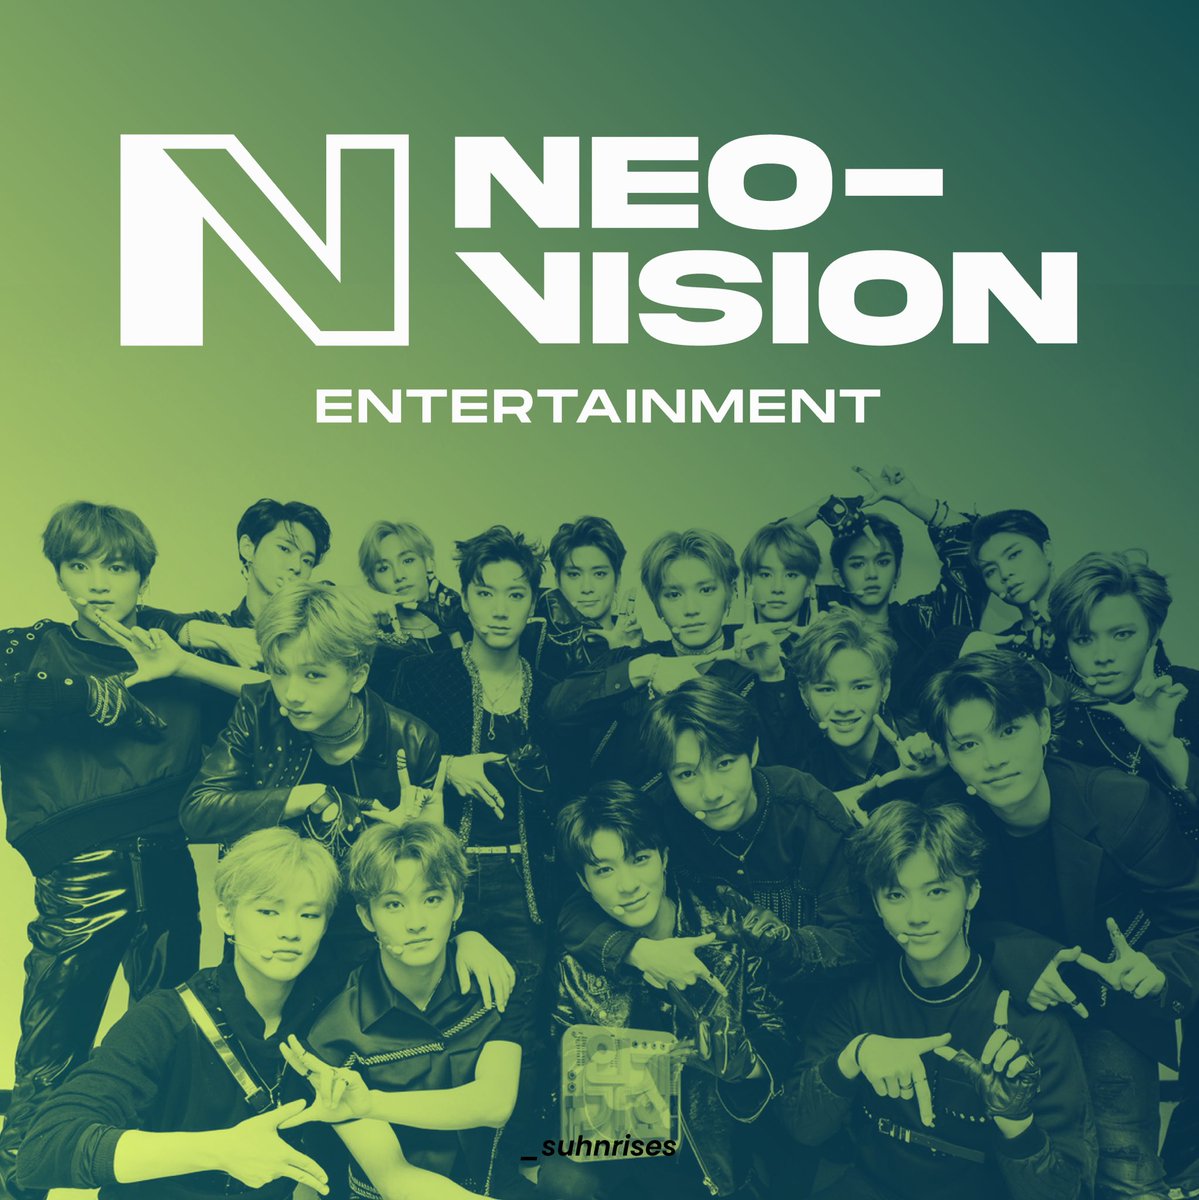 nct & wayv: neo vision entertainment- entertainment company (burn sm)- gives everyone equal screentime & lines; protects their artists; lets winwin do solo activities- yes all of them are included but i didn’t have a pic of them all together so black on black it is